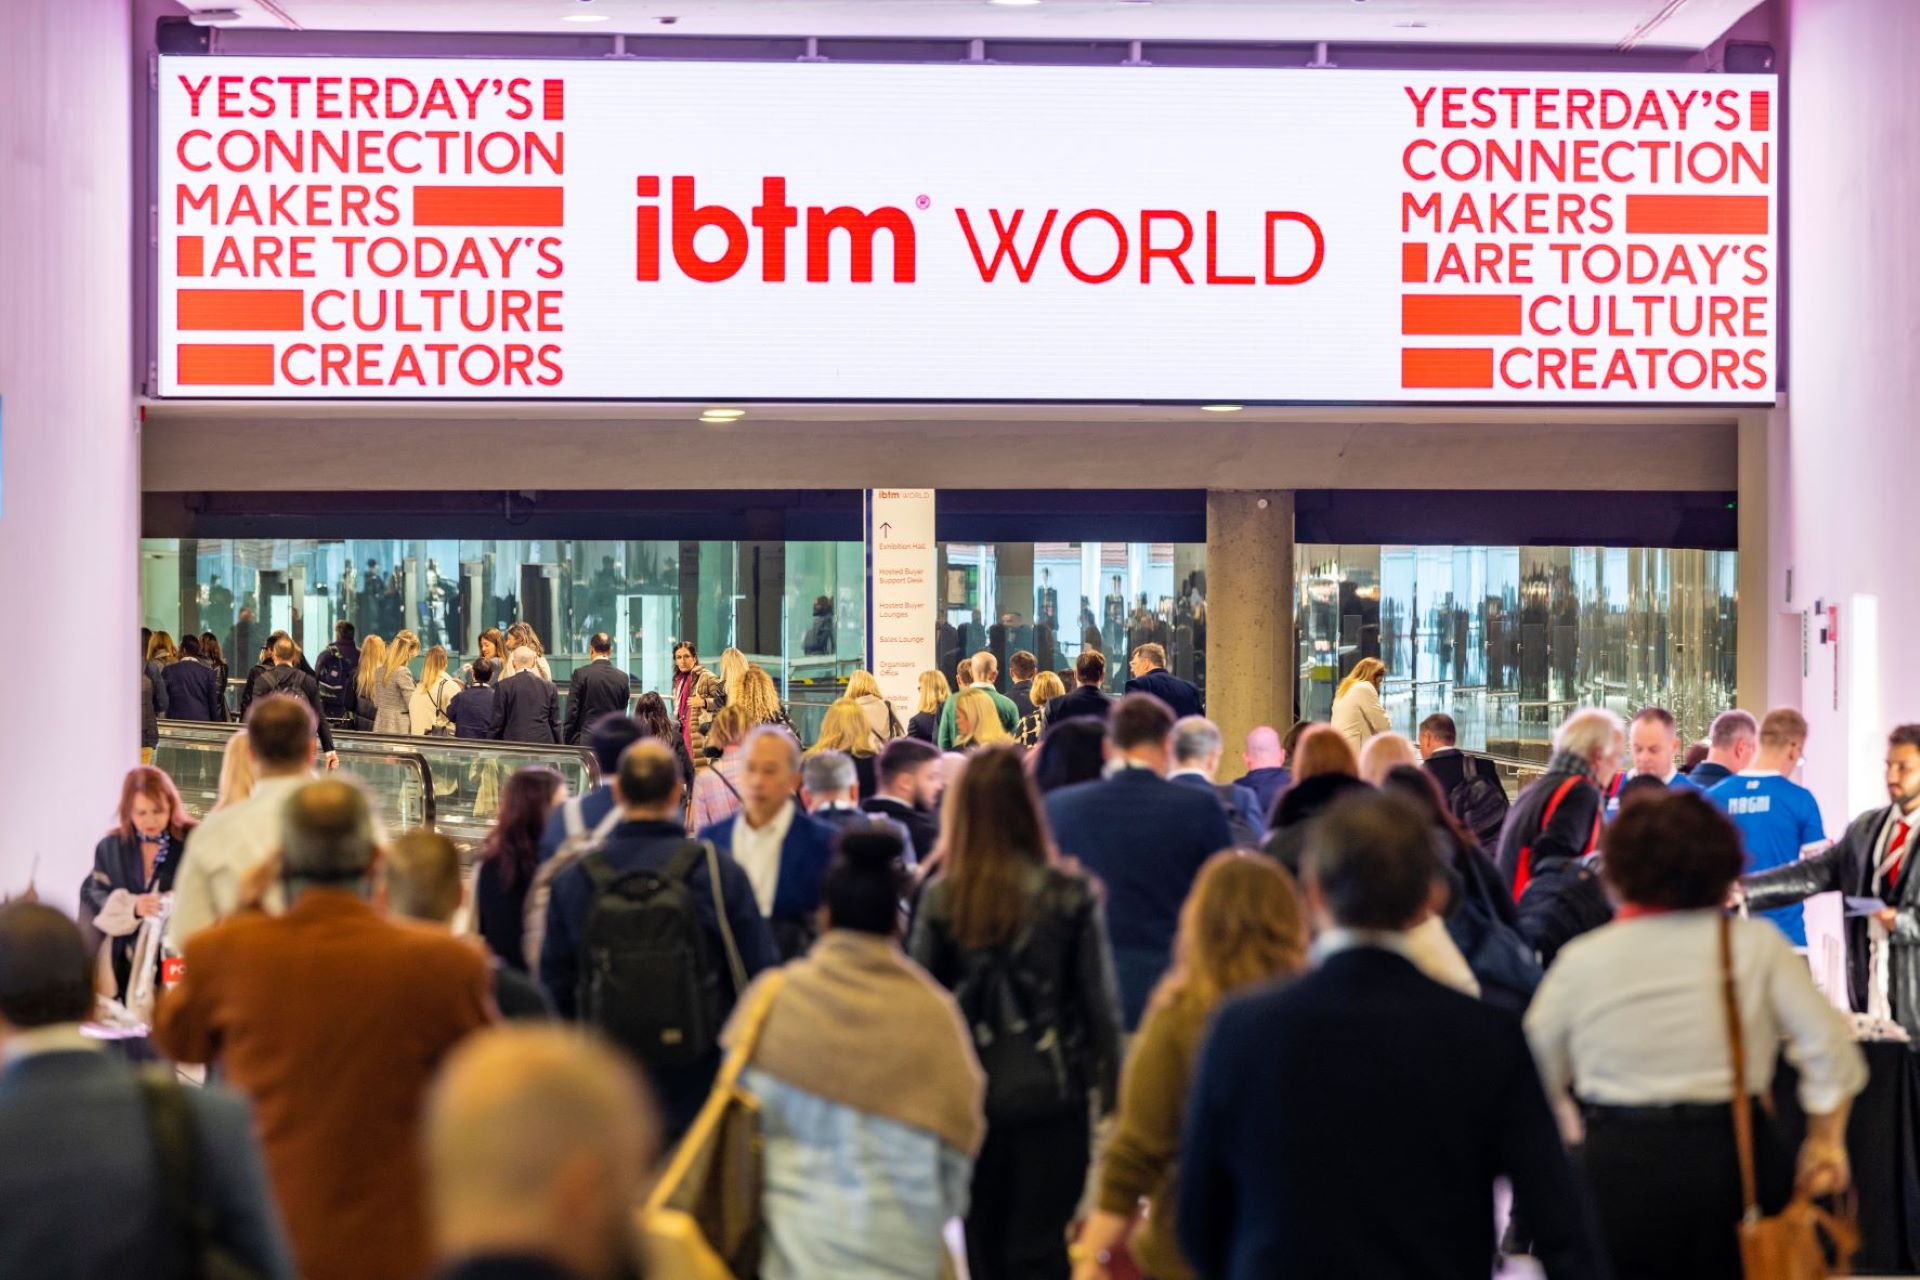 IBTM Directory, Event Suppliers